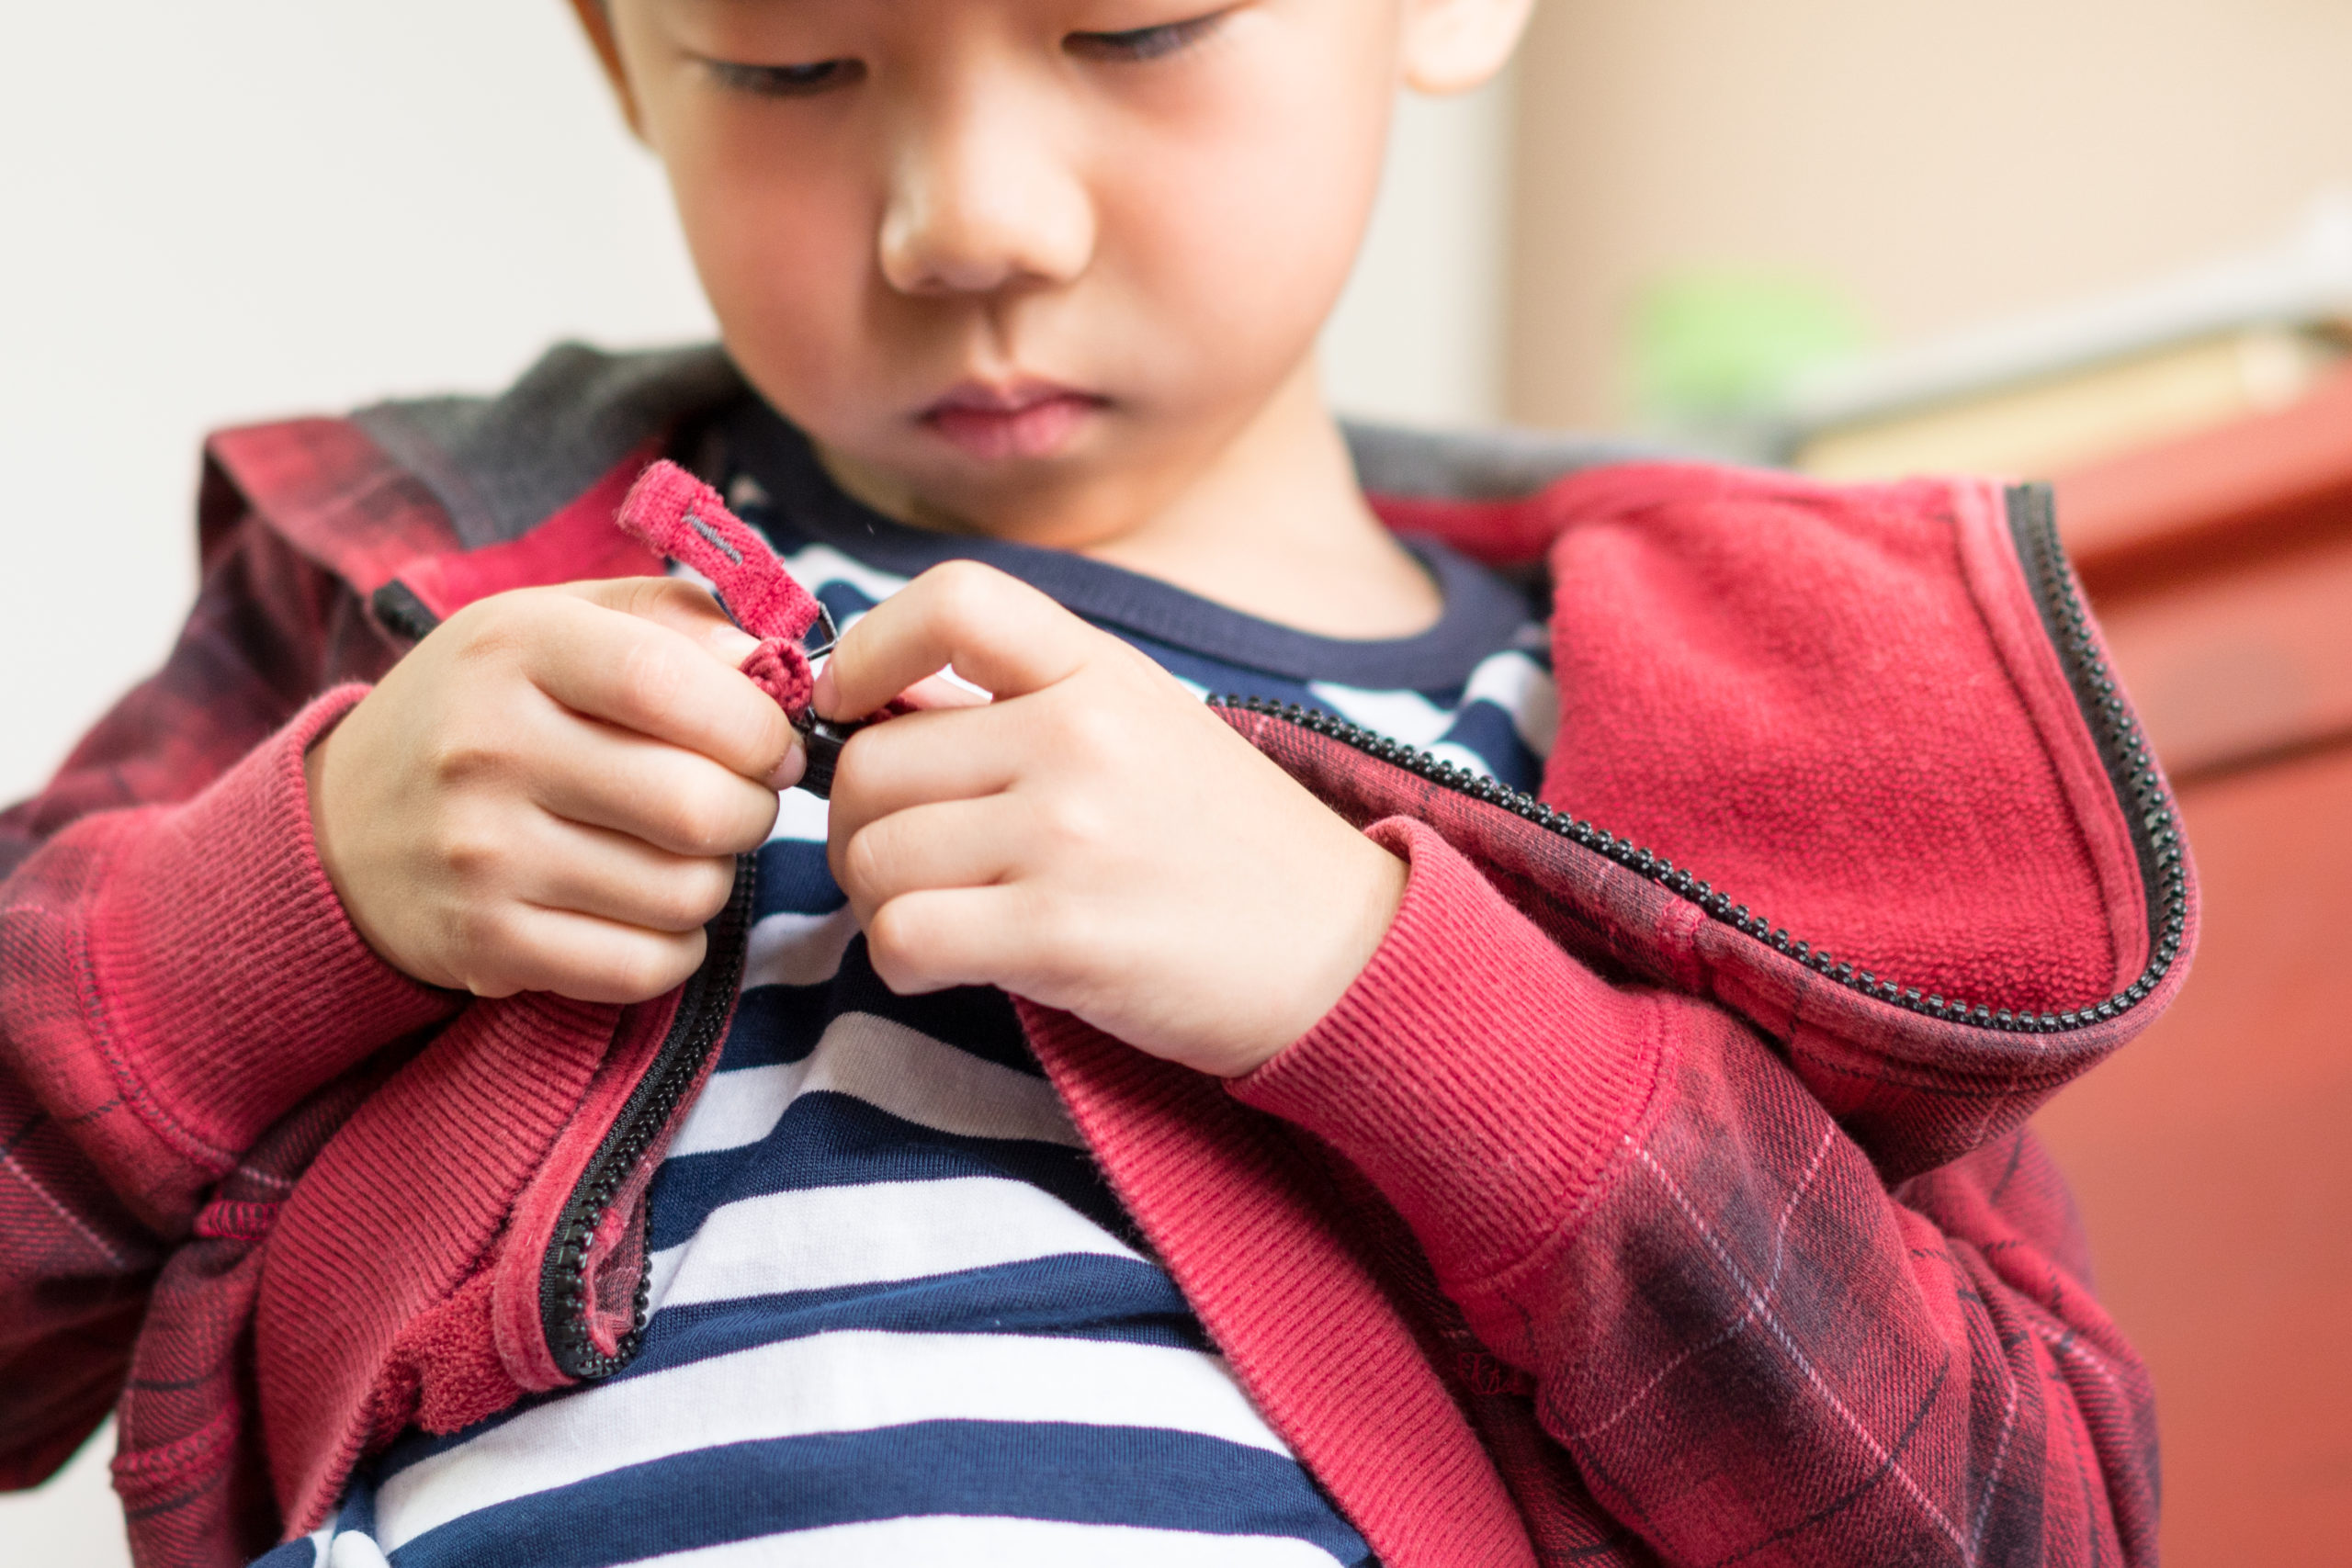 School's out, but is your child safe to dress themselves?